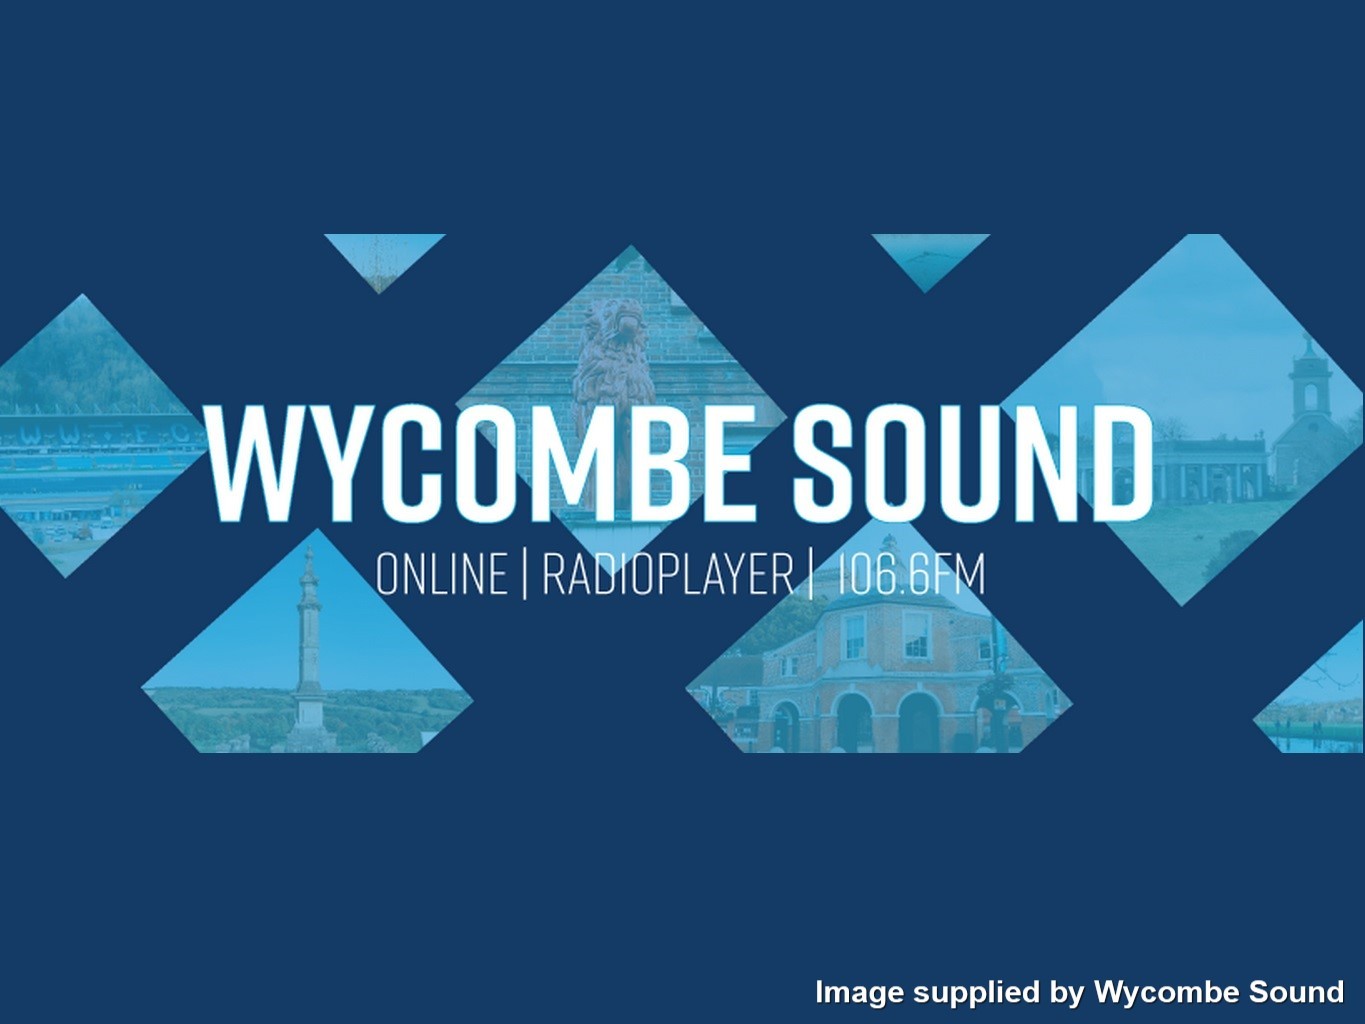 External-WycombeSound-WycombeSoundLogoWithLocalImages